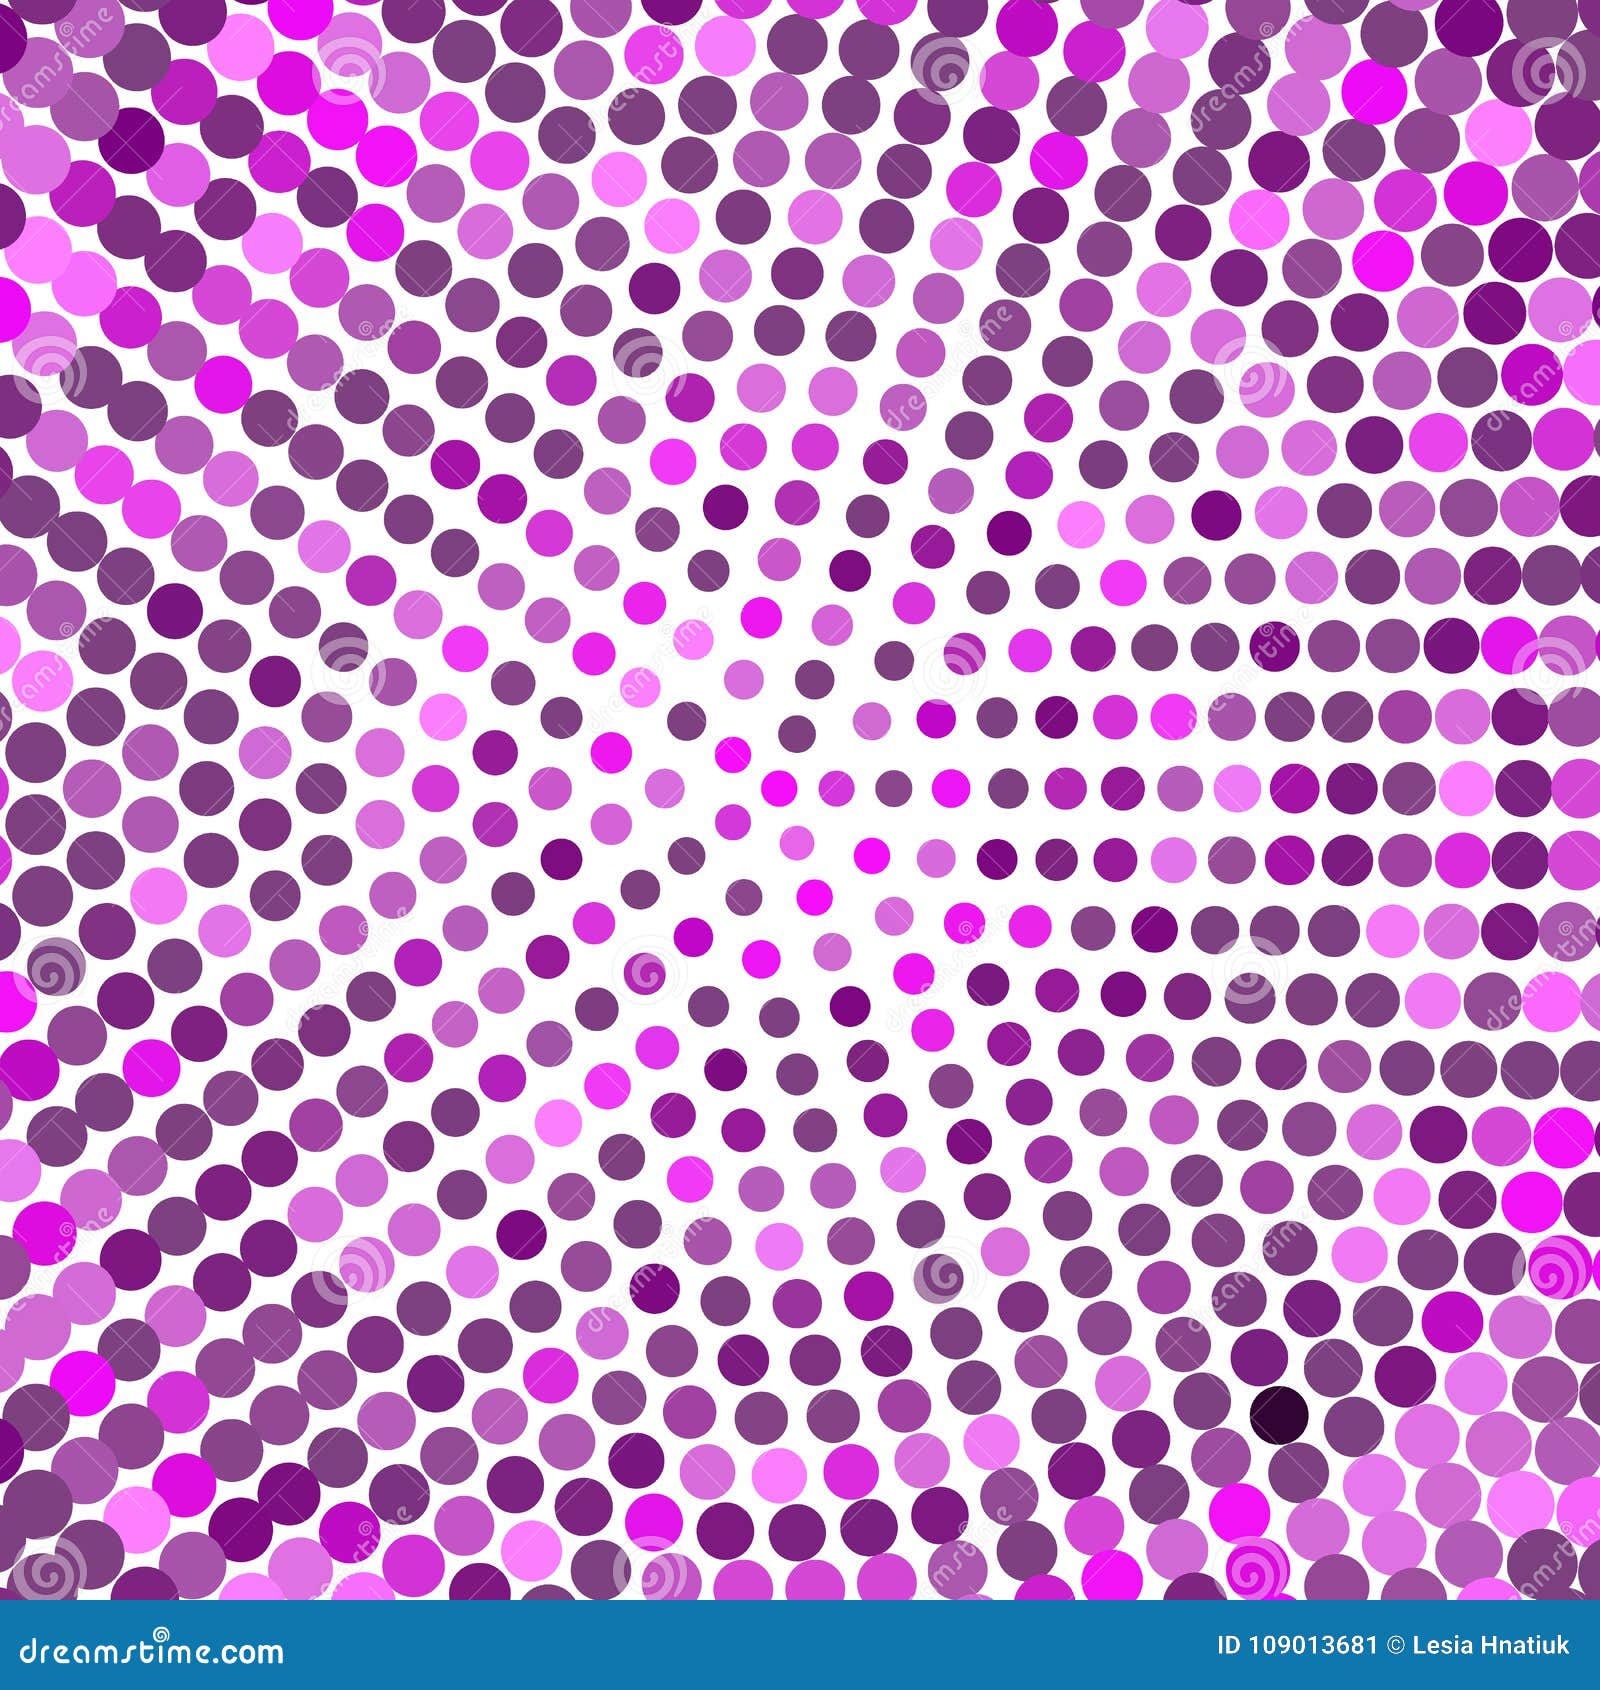 Abstract Purple Dotted Background Halftone Dots Radial Texture ...